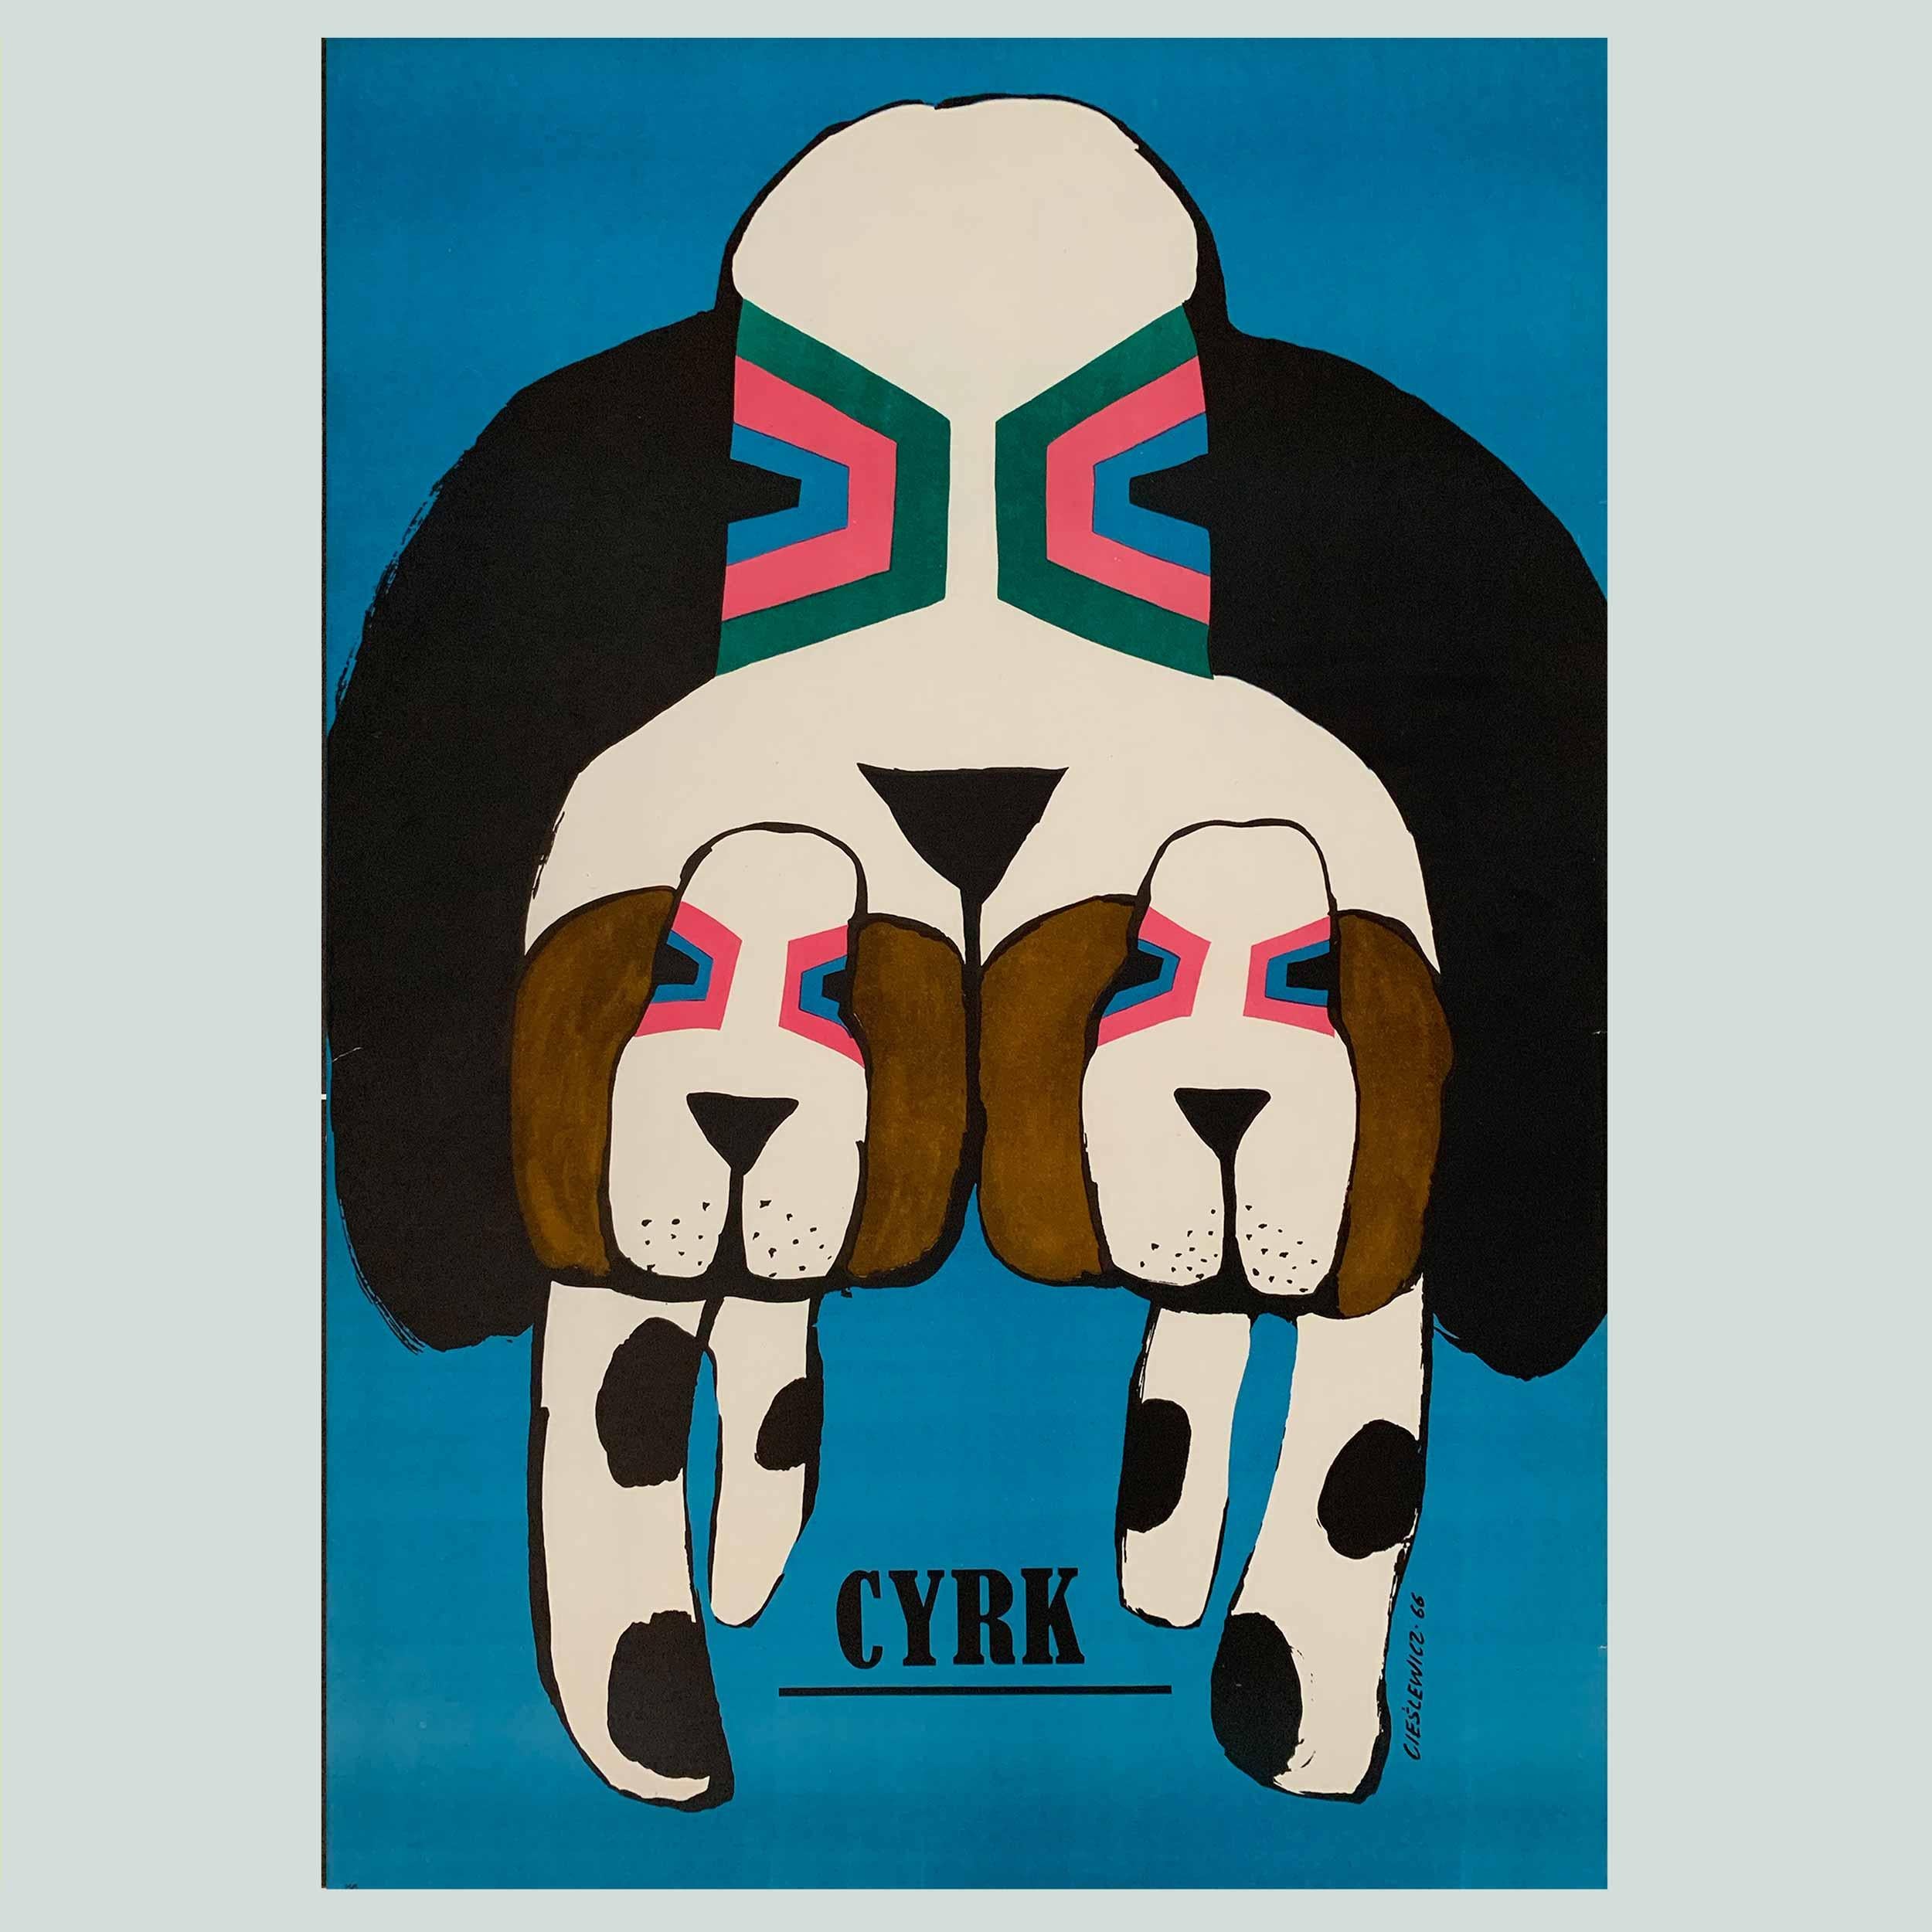 This is such an incredible original Polish cyrk (circus) poster designed by one of the biggest legend of the Polish School of Posters - Roman Cieslewicz. It’s really iconic and instantly recognisable.

Polish B1 size: 67 x 98 cm.